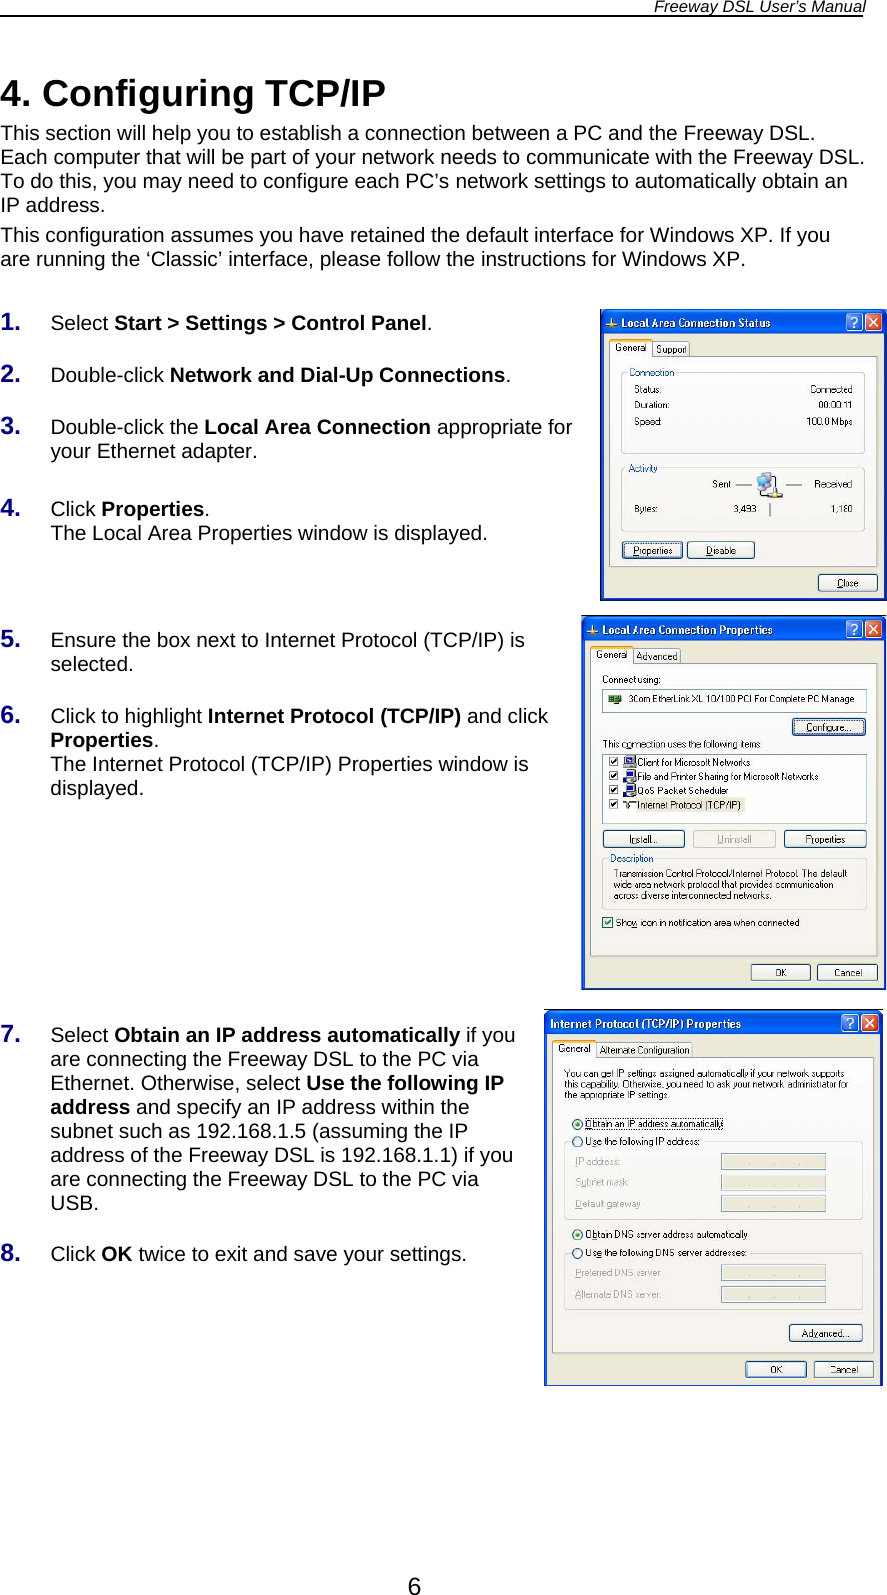 Freeway DSL User’s Manual  6 4. Configuring TCP/IP This section will help you to establish a connection between a PC and the Freeway DSL. Each computer that will be part of your network needs to communicate with the Freeway DSL. To do this, you may need to configure each PC’s network settings to automatically obtain an IP address. This configuration assumes you have retained the default interface for Windows XP. If you are running the ‘Classic’ interface, please follow the instructions for Windows XP.  1.  Select Start &gt; Settings &gt; Control Panel.  2.  Double-click Network and Dial-Up Connections.  3.  Double-click the Local Area Connection appropriate for your Ethernet adapter.  4.  Click Properties. The Local Area Properties window is displayed.    5.  Ensure the box next to Internet Protocol (TCP/IP) is selected.  6.  Click to highlight Internet Protocol (TCP/IP) and click Properties. The Internet Protocol (TCP/IP) Properties window is displayed.        7.  Select Obtain an IP address automatically if you are connecting the Freeway DSL to the PC via Ethernet. Otherwise, select Use the following IP address and specify an IP address within the subnet such as 192.168.1.5 (assuming the IP address of the Freeway DSL is 192.168.1.1) if you are connecting the Freeway DSL to the PC via USB.  8.  Click OK twice to exit and save your settings. 